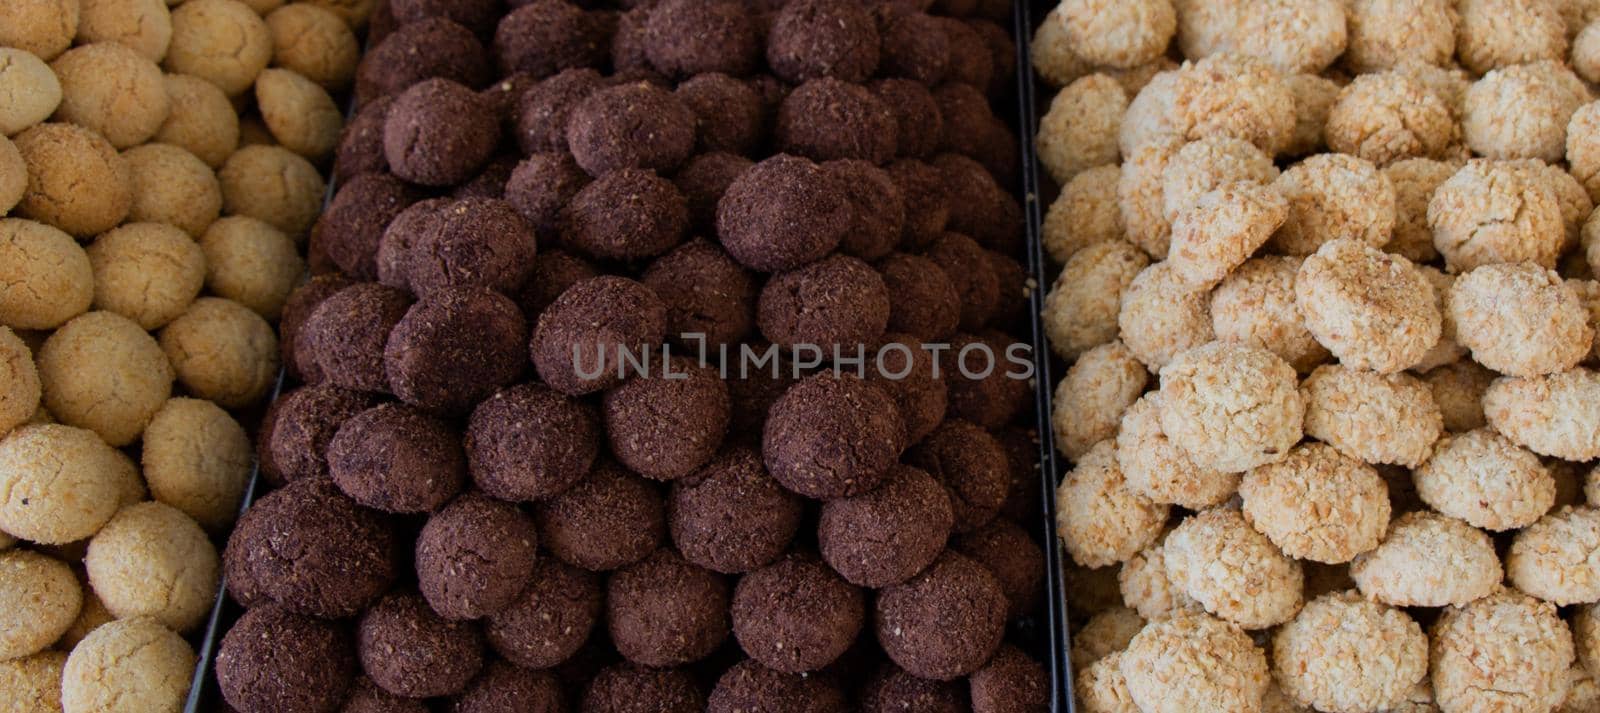 Turkish style freshly made cookies  as snack in view